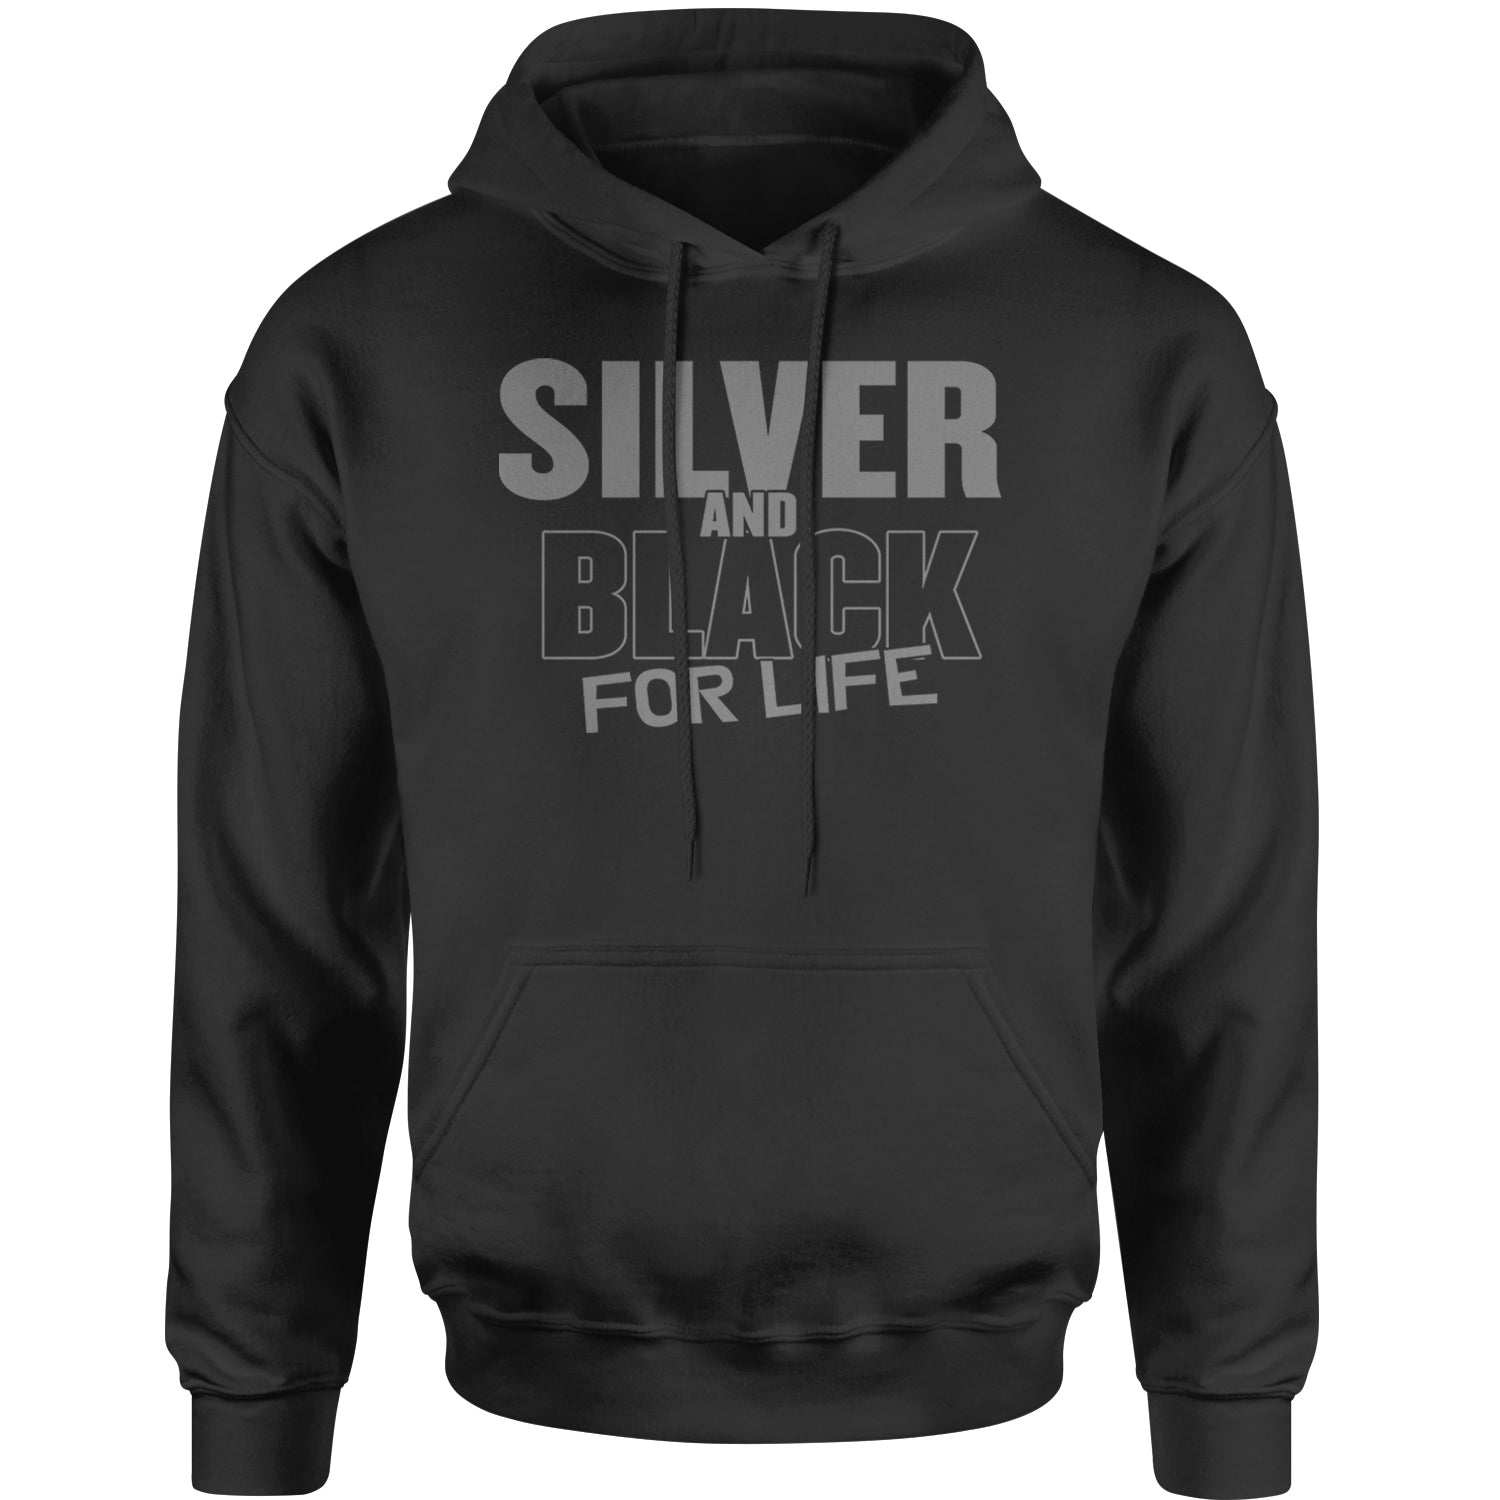 Silver And Black For Life Football Fan Adult Hoodie Sweatshirt